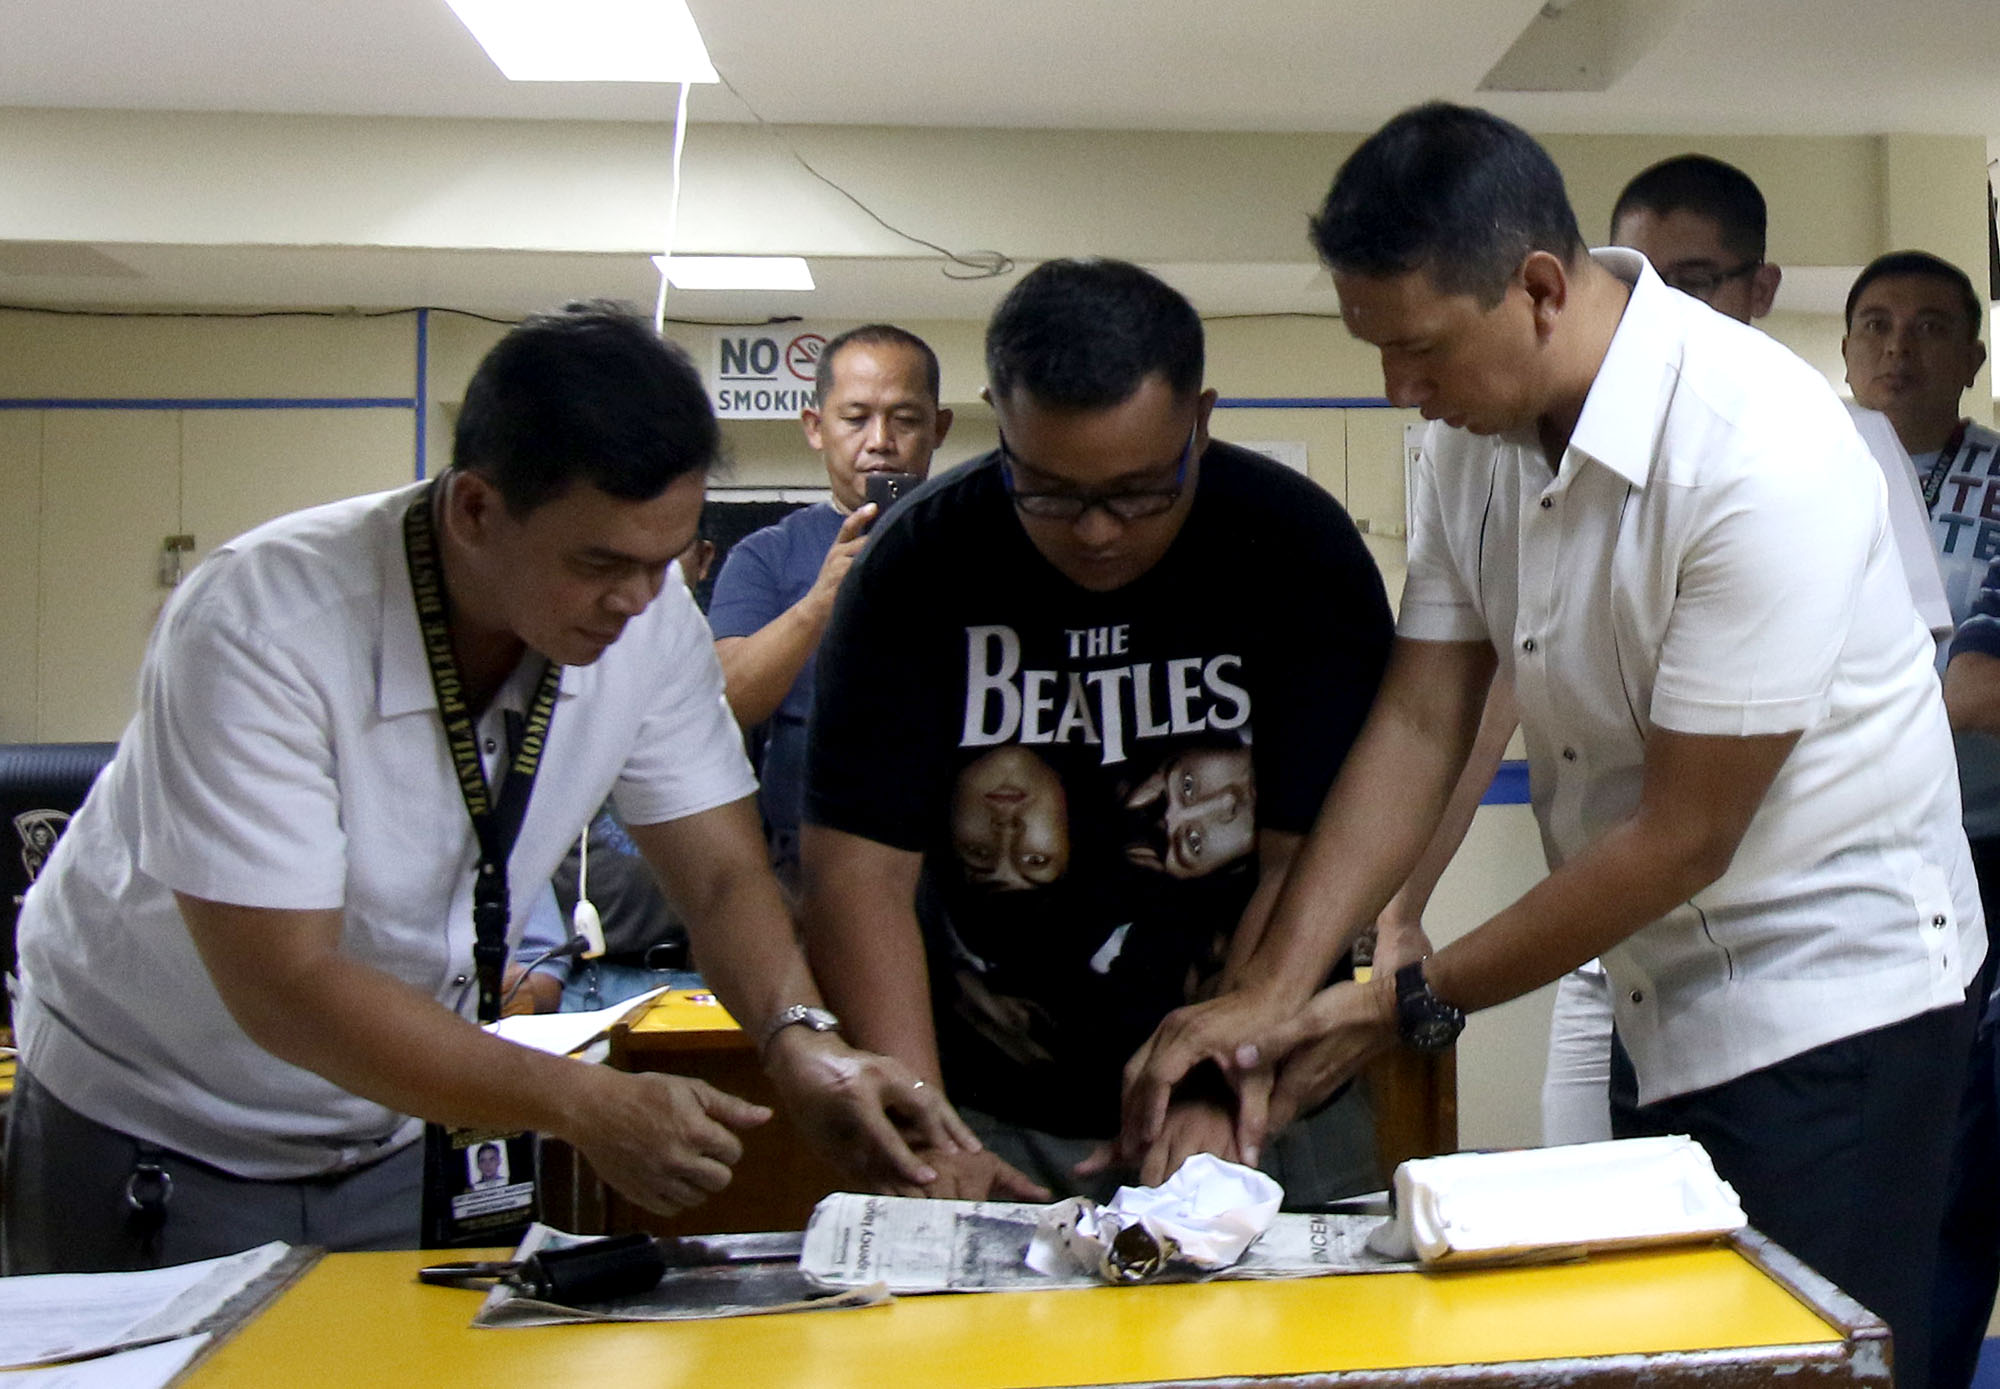 SEEKING RELEASE. In this file photo from September 22, 2017, the Manila Police get the fingerprints of John Paul Solano, the principal suspect in the killing of Horacio Castillo III, upon his surrender. Solano now wants to be released from police custody. Photo by Inoue Jaena/Rappler 